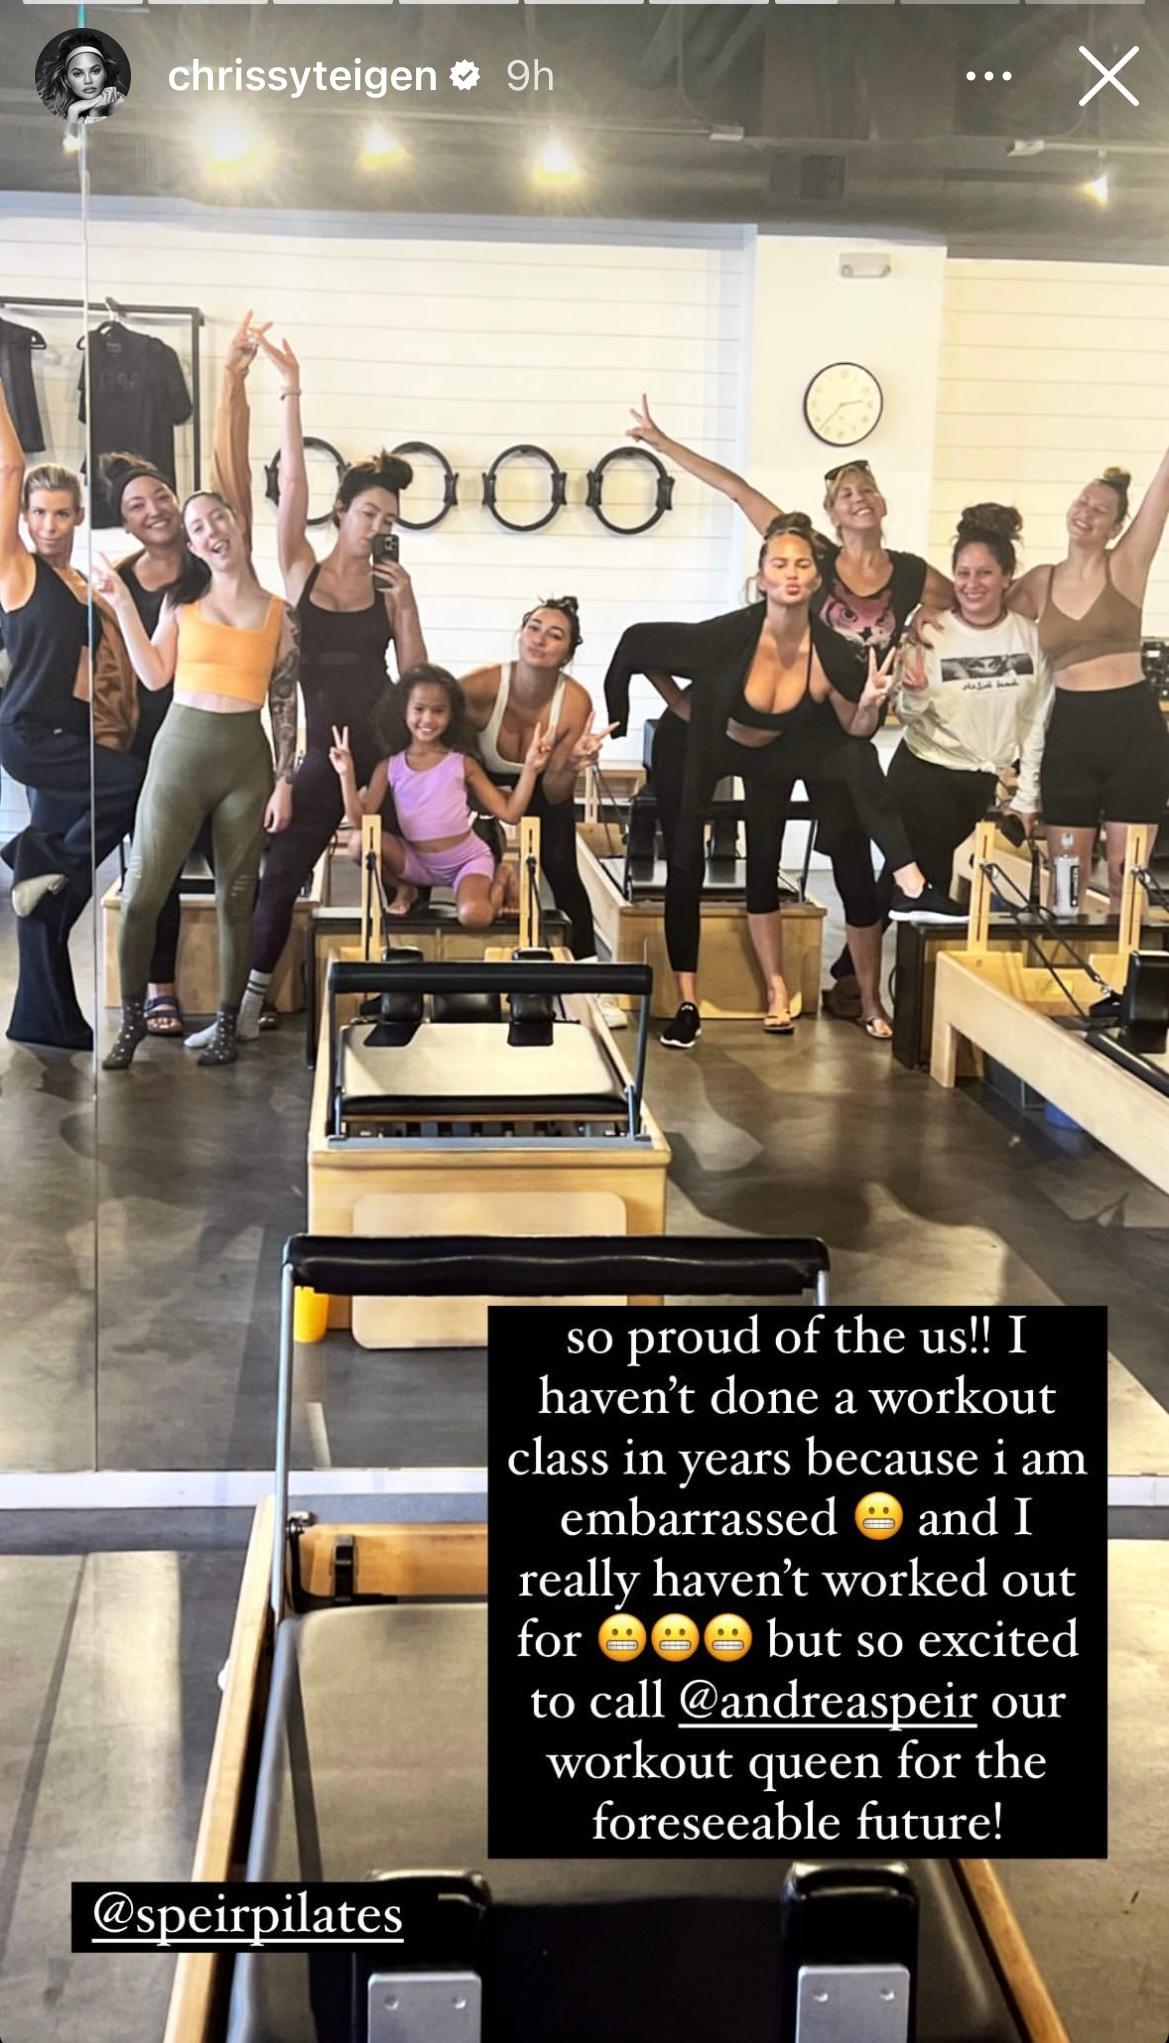 Chrissy Teigen does workout class for first time in years